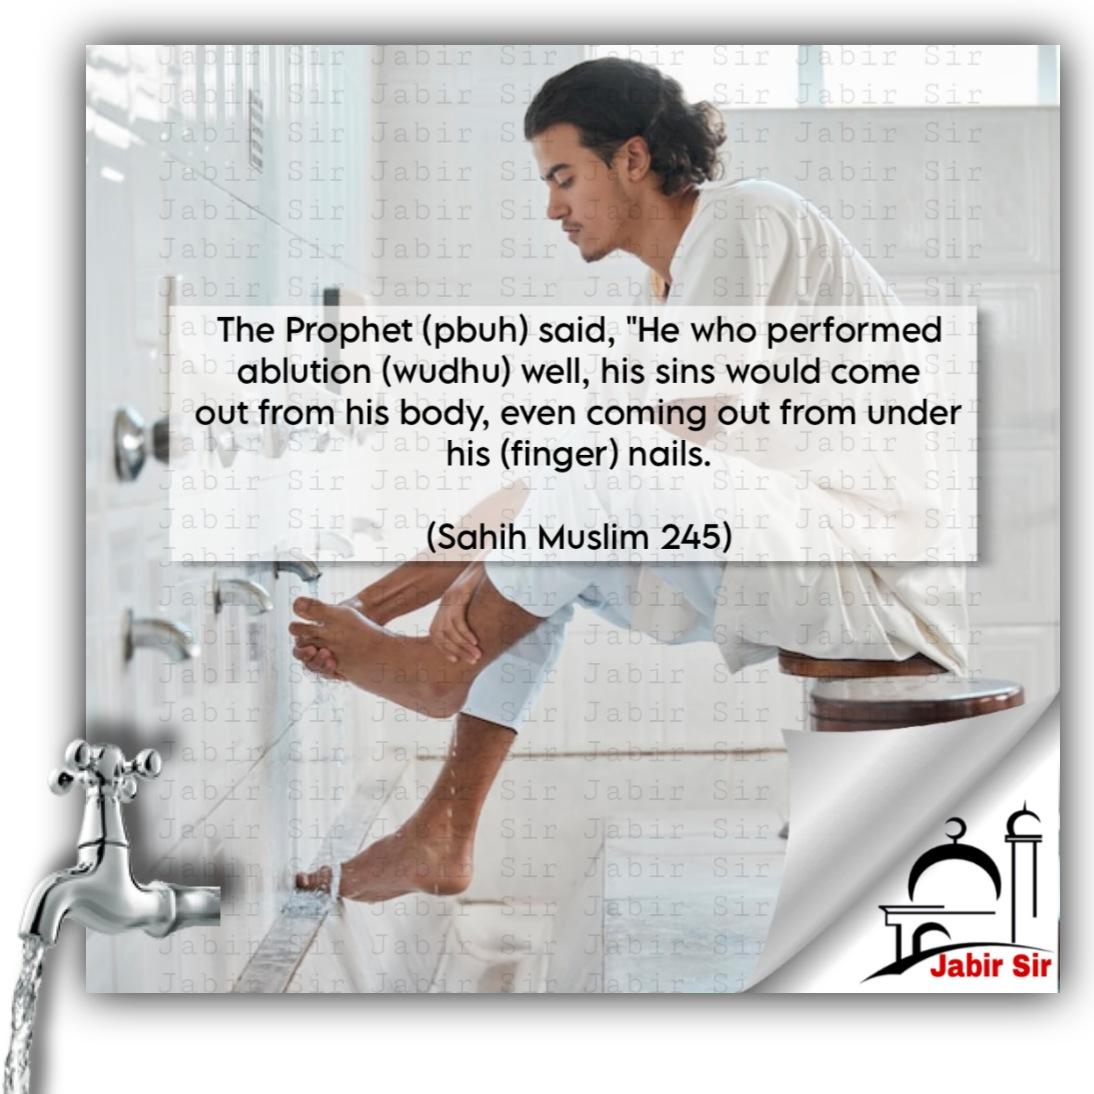 The Prophet (pbuh) said, 'He who performed ablution (wudhu) well, his sins would come out from his body, even coming out from under his (finger) nails. (Sahih Muslim 245) #lifelessons #jabirsir #islamquote